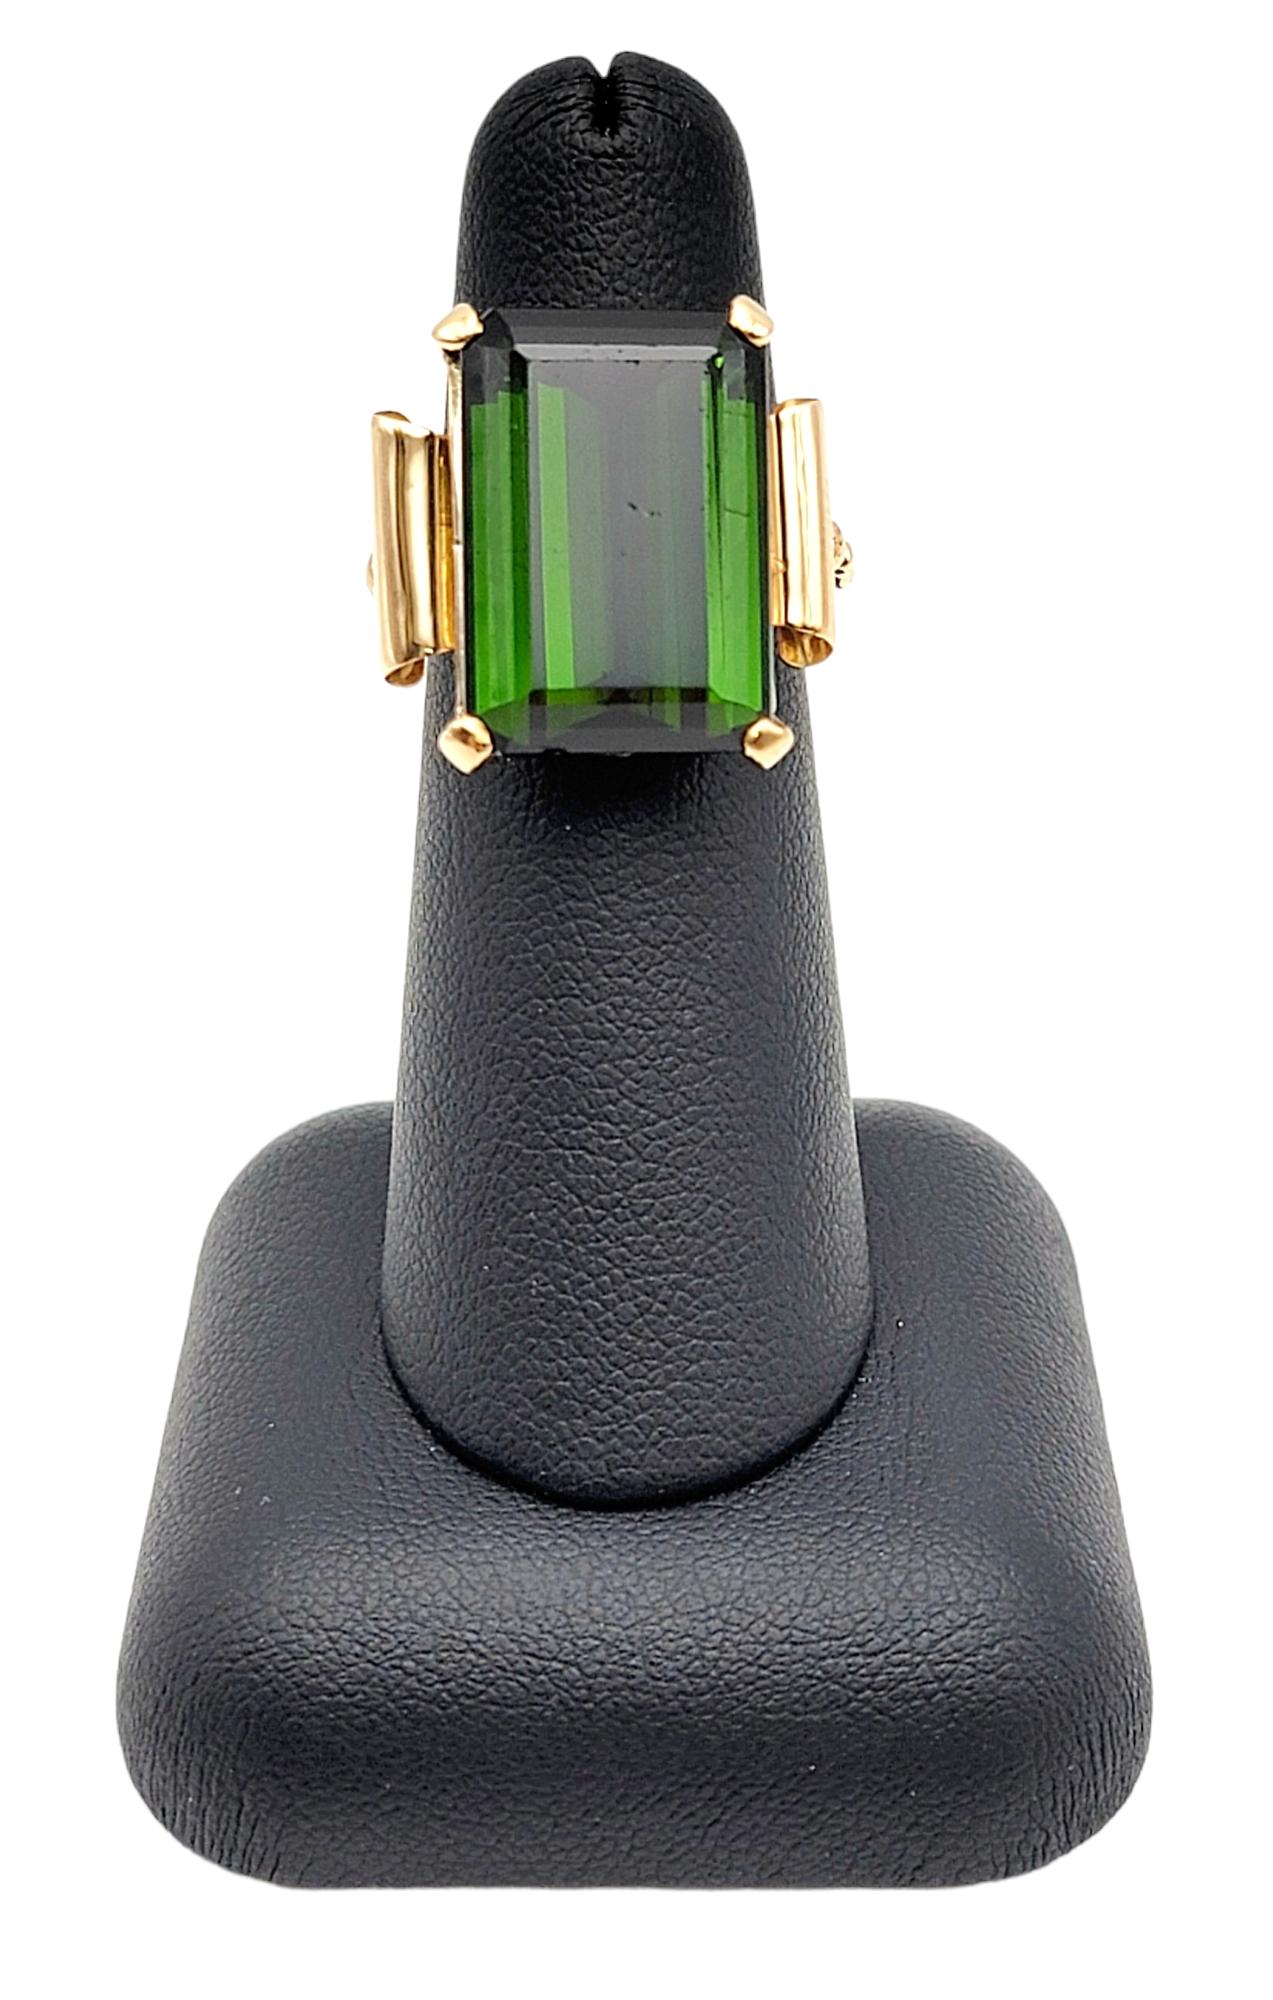 Vintage 15.58 Carat Emerald Cut Green Tourmaline Cocktail Ring in Yellow Gold For Sale 2